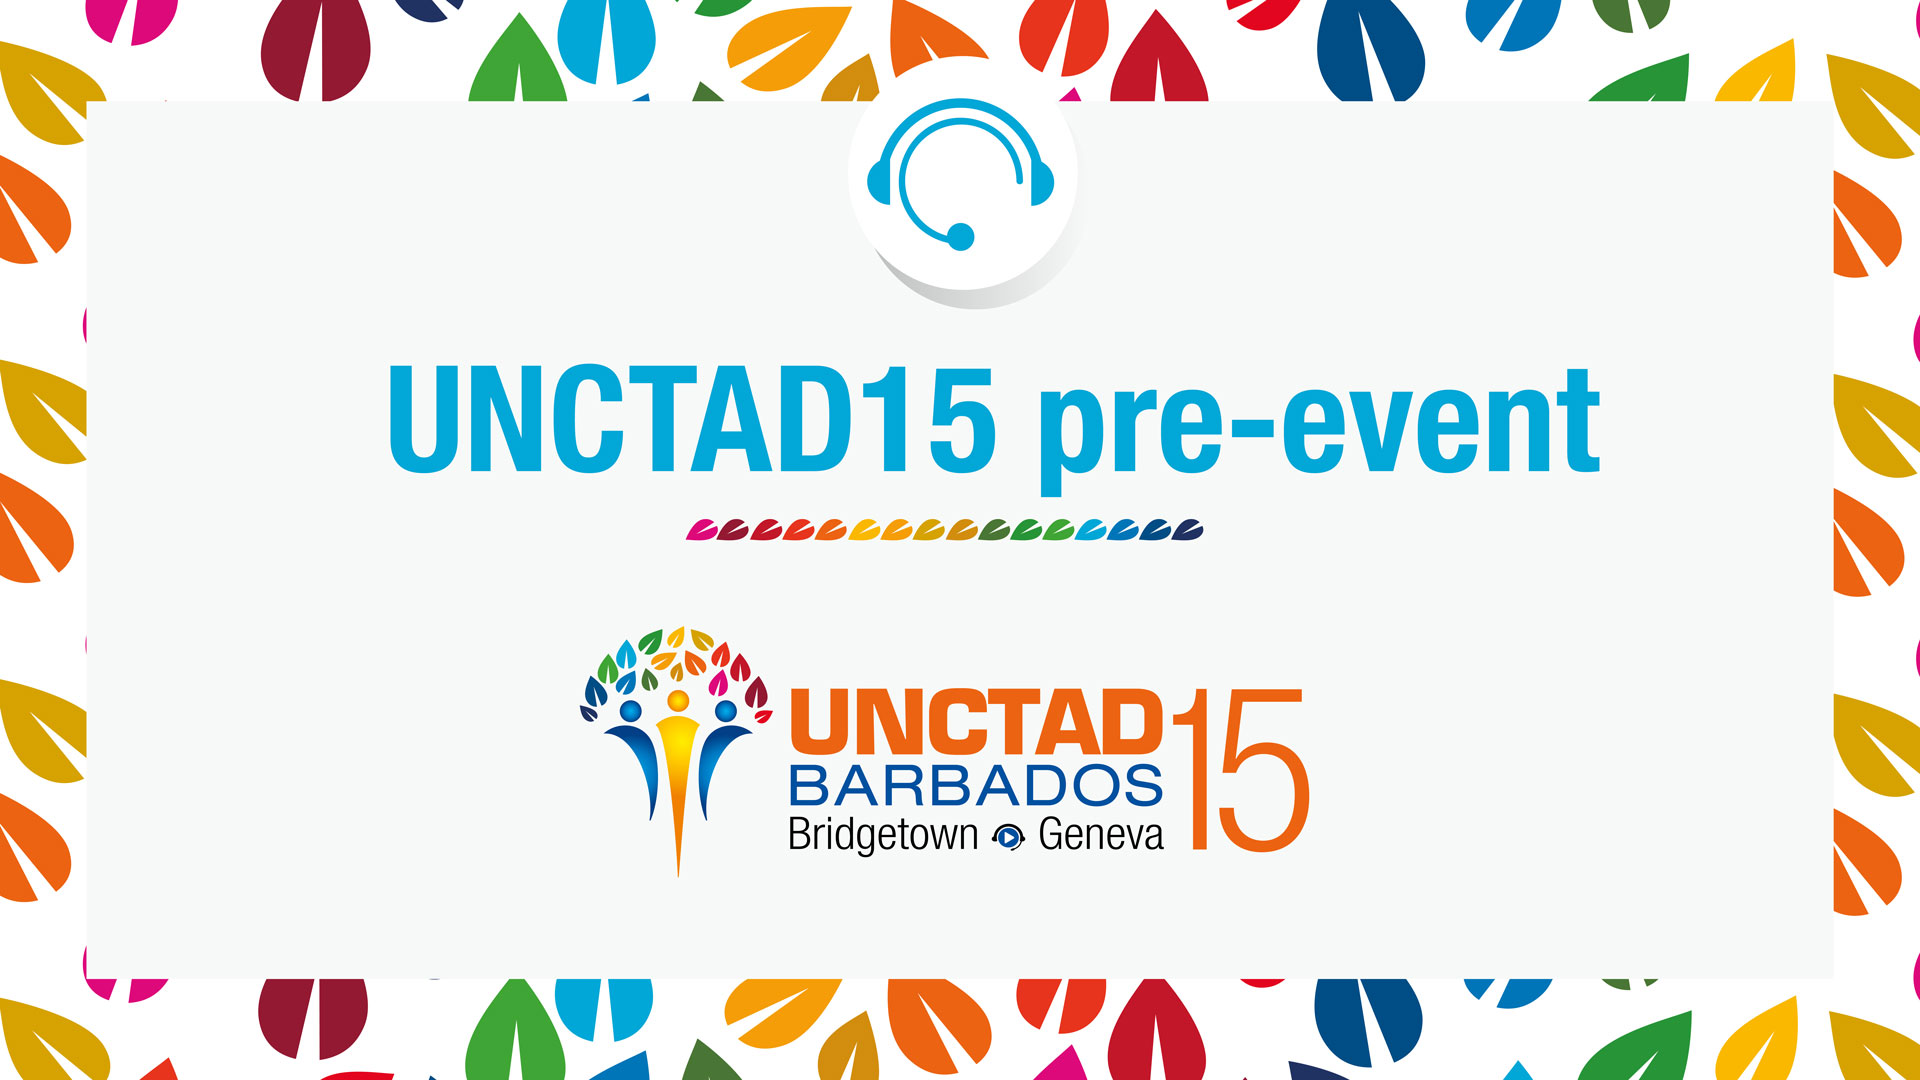 UNCTAD15 pre-event: Productive capacities for the new decade